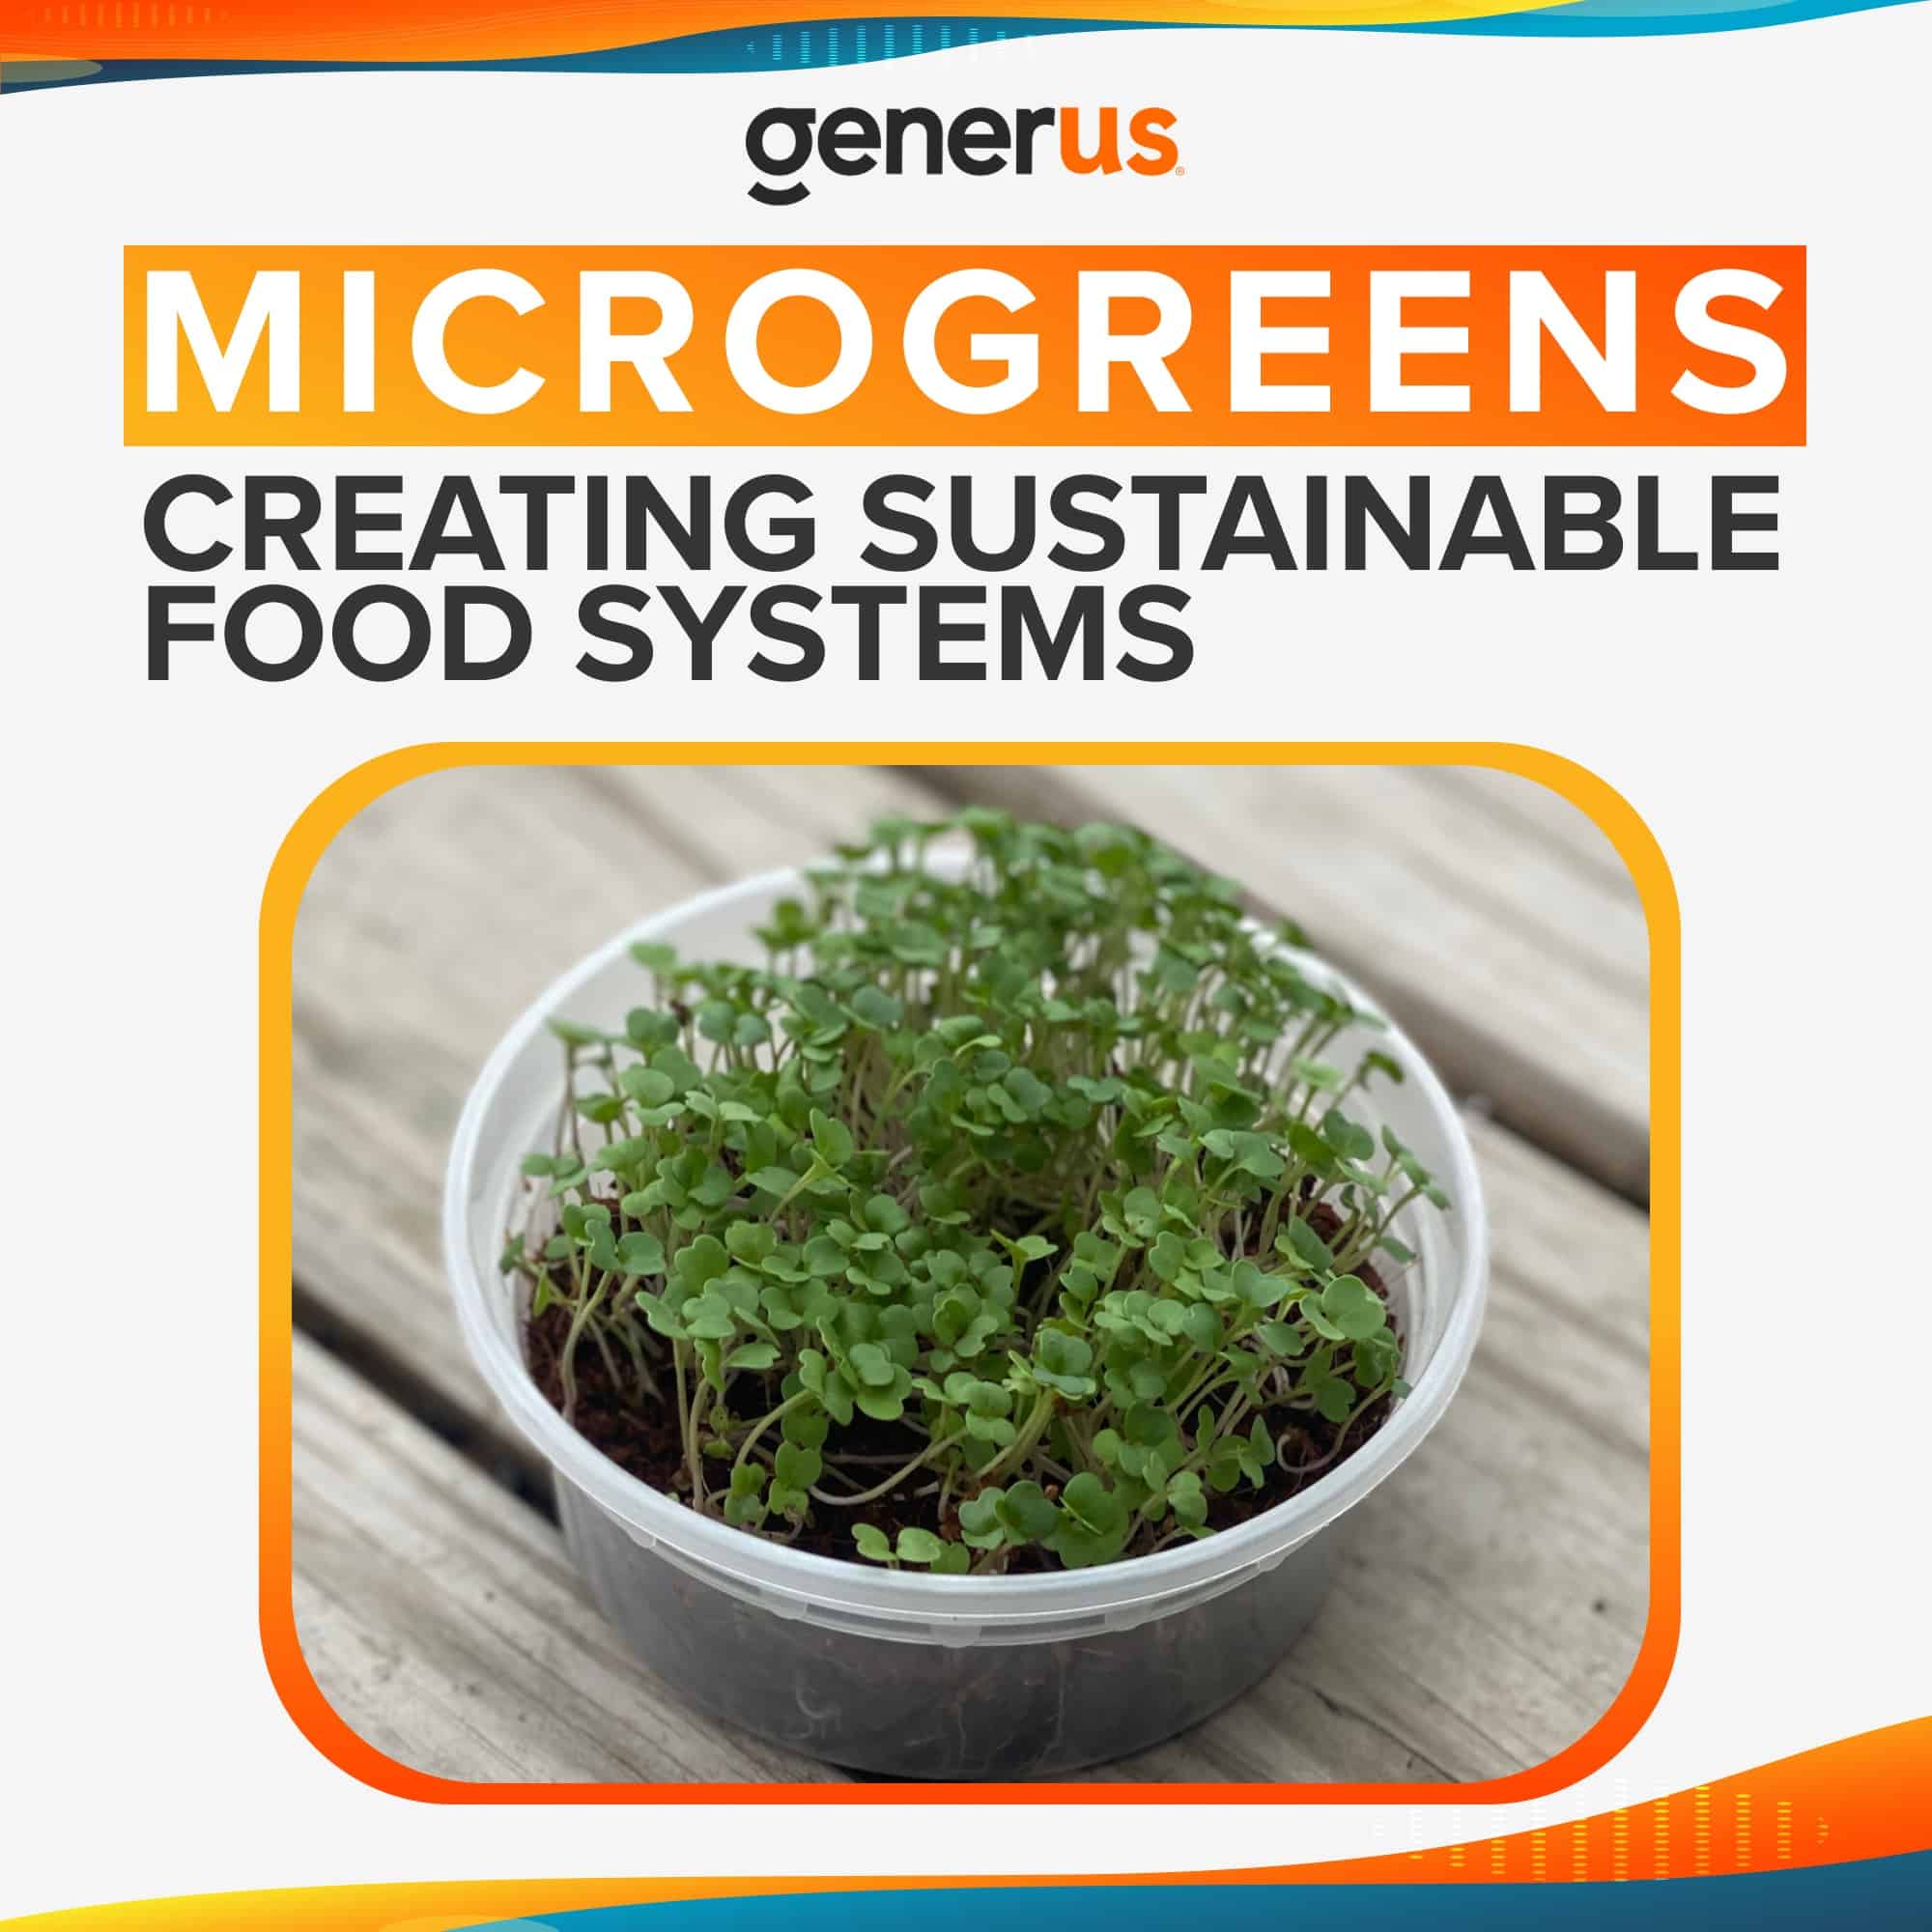 Building Sustainable Food Systems with Microgreens